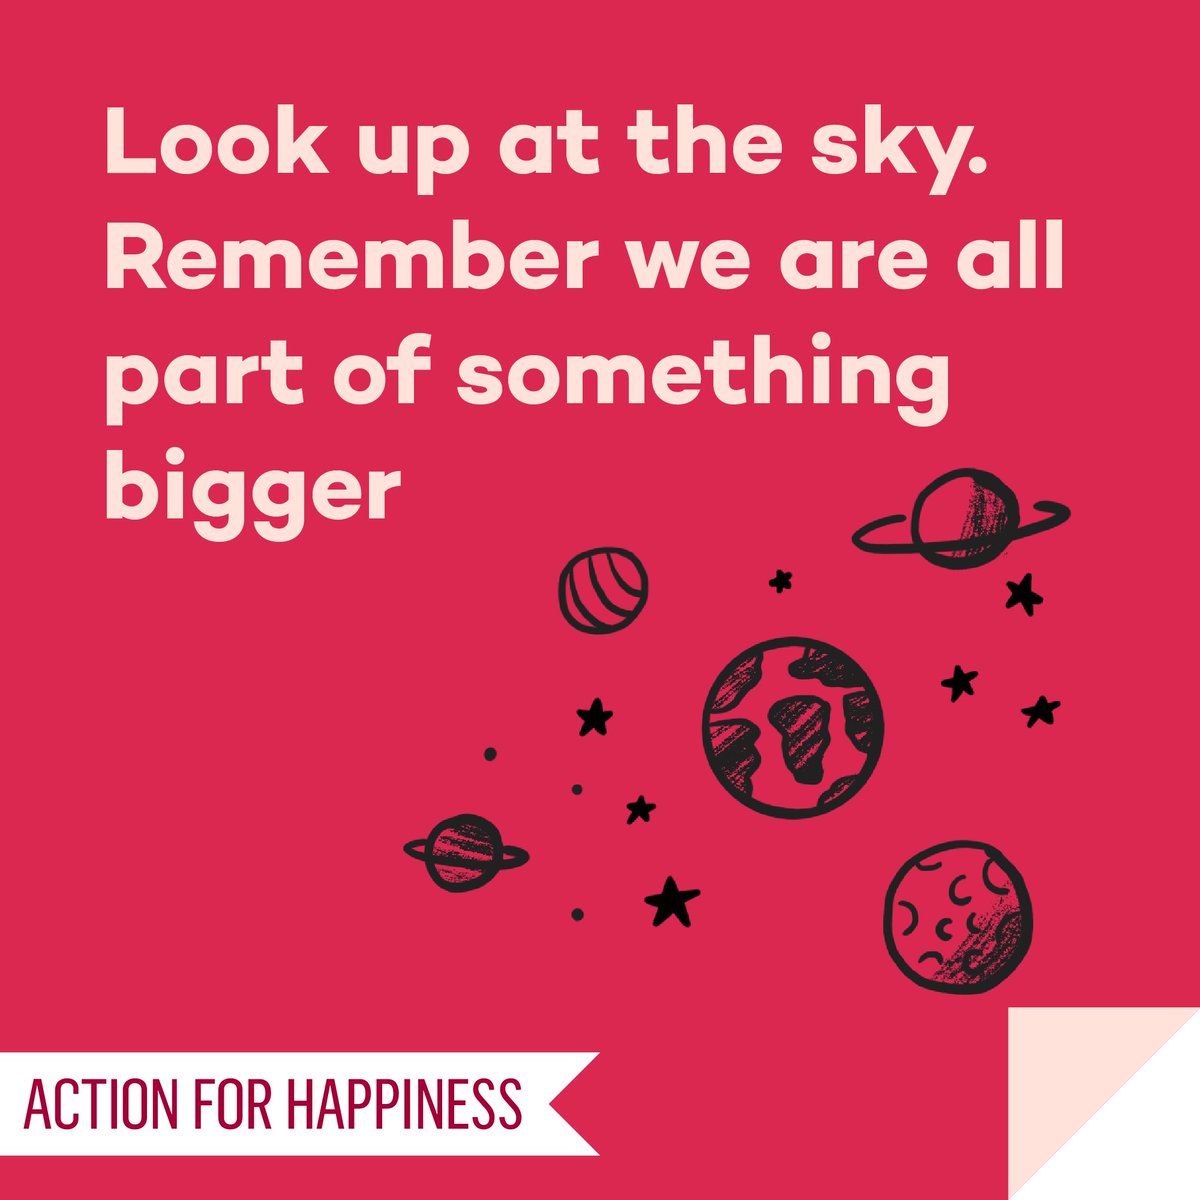 Meaningful May - Day 21: Look up at the sky. Remember we are all part of something bigger actionforhappiness.org/meaningful-may #meaningfulmay